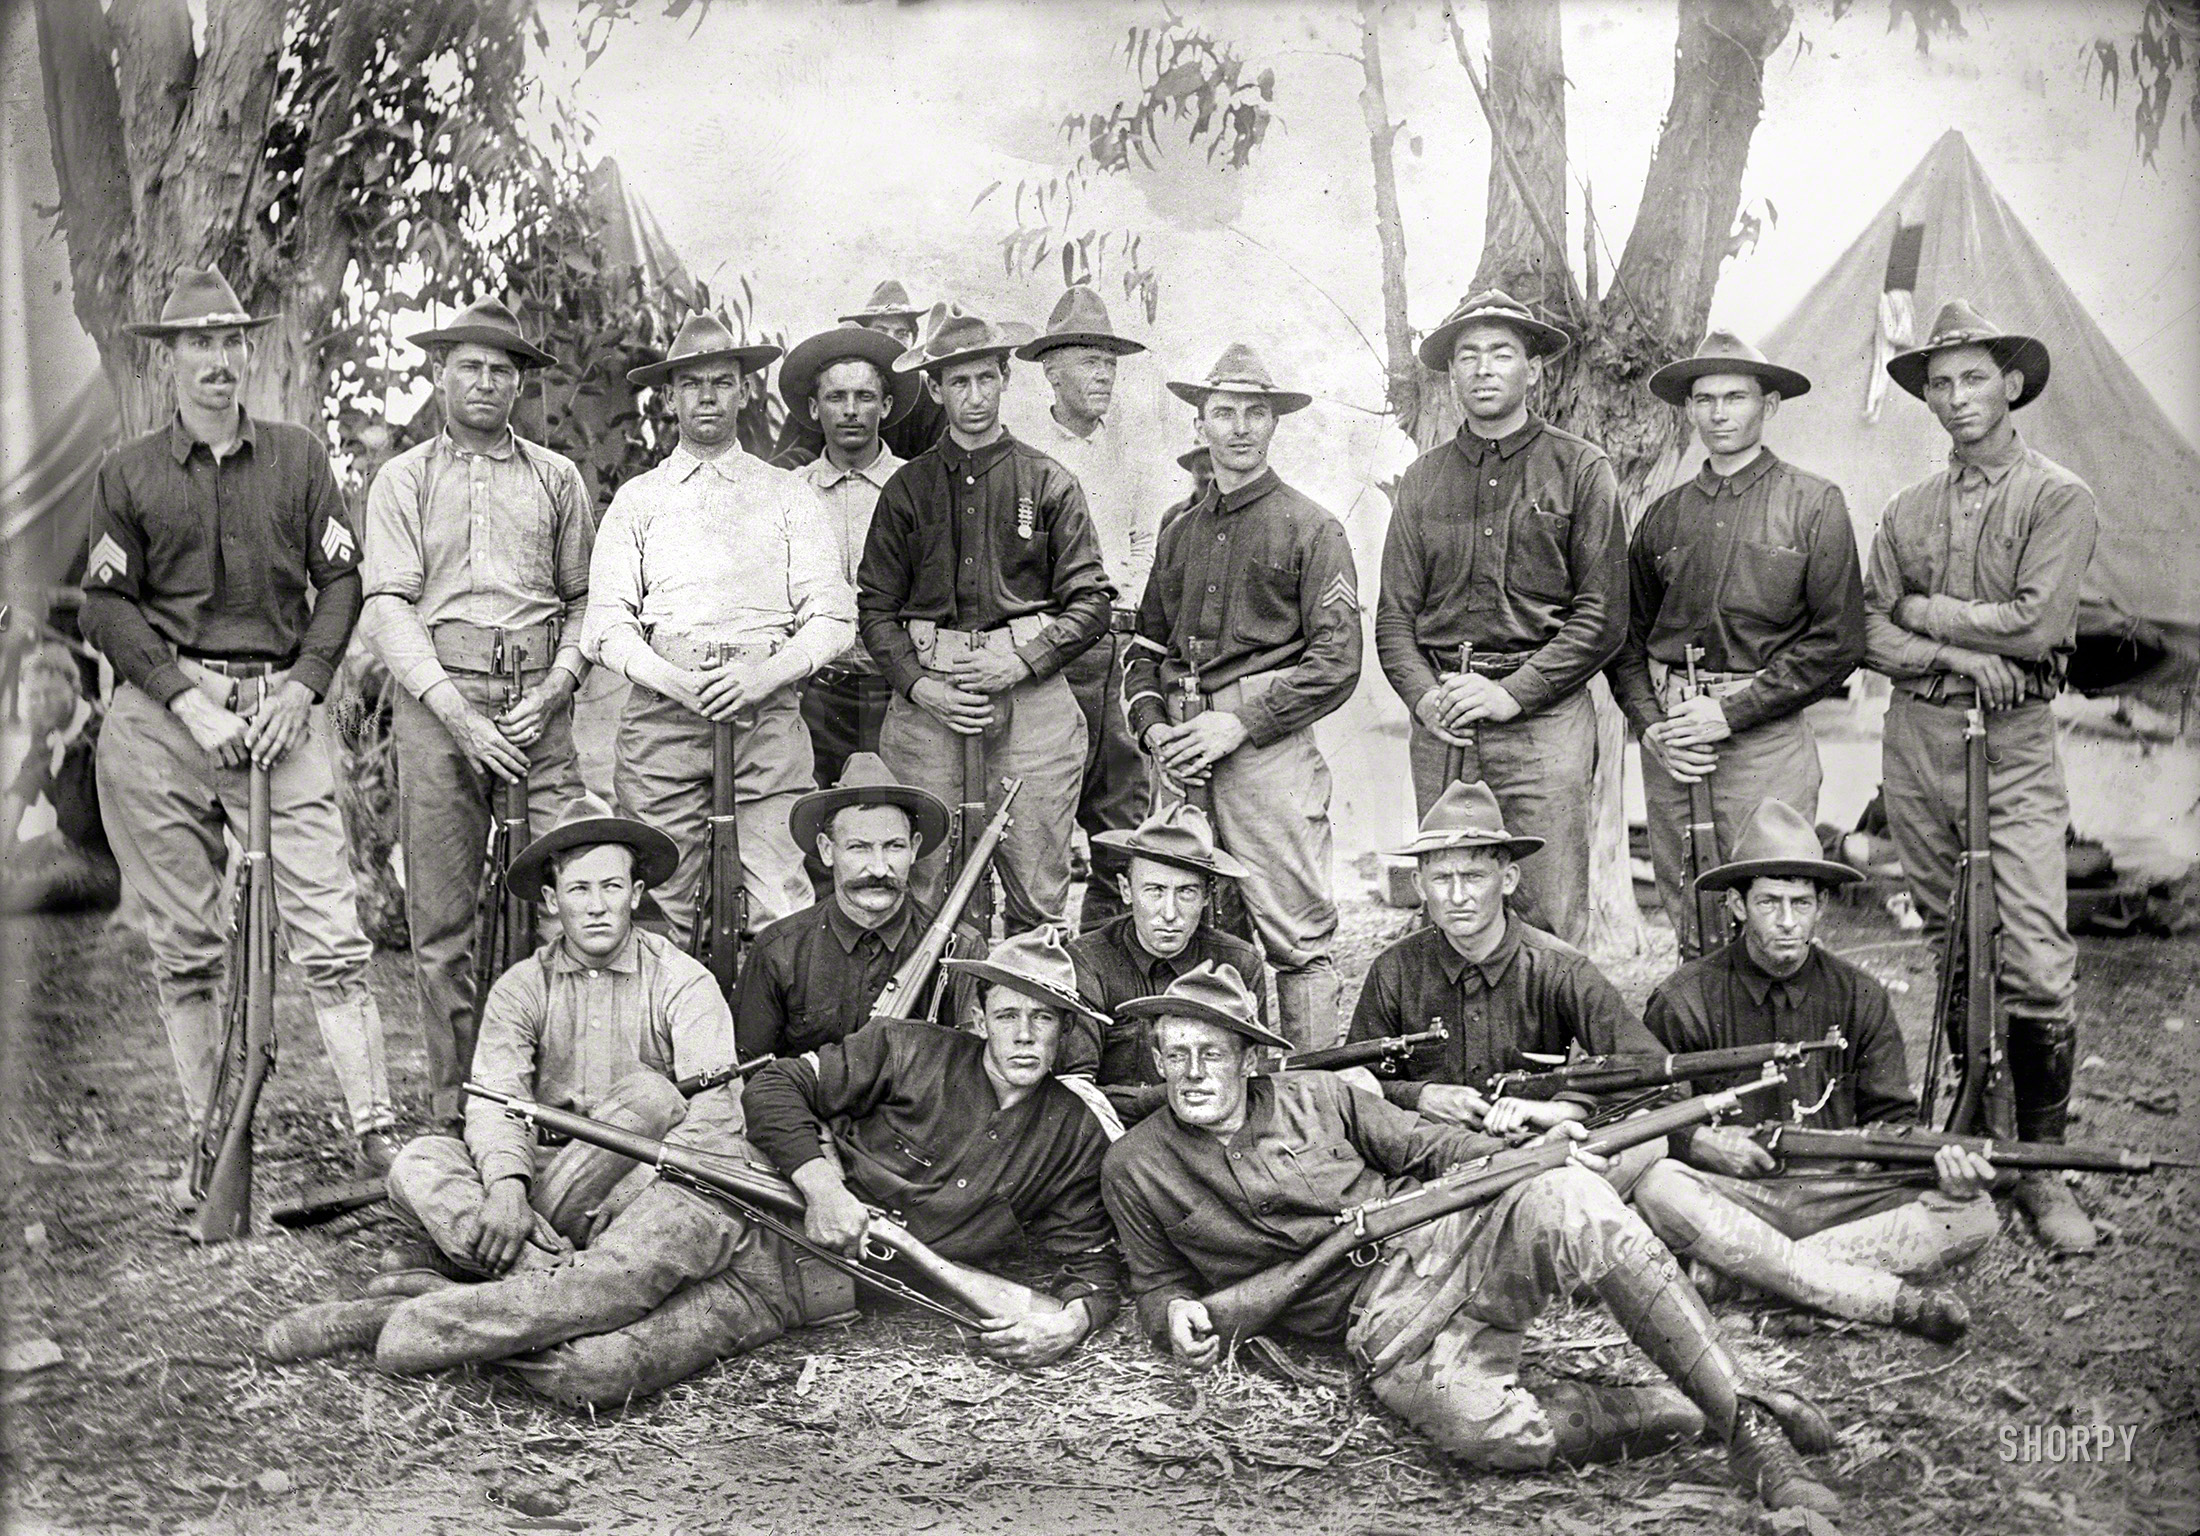 1908. "California rifle team at Camp Perry, Ohio." Site of the National Shoot. 5x7 glass negative, George Grantham Bain Collection. View full size.